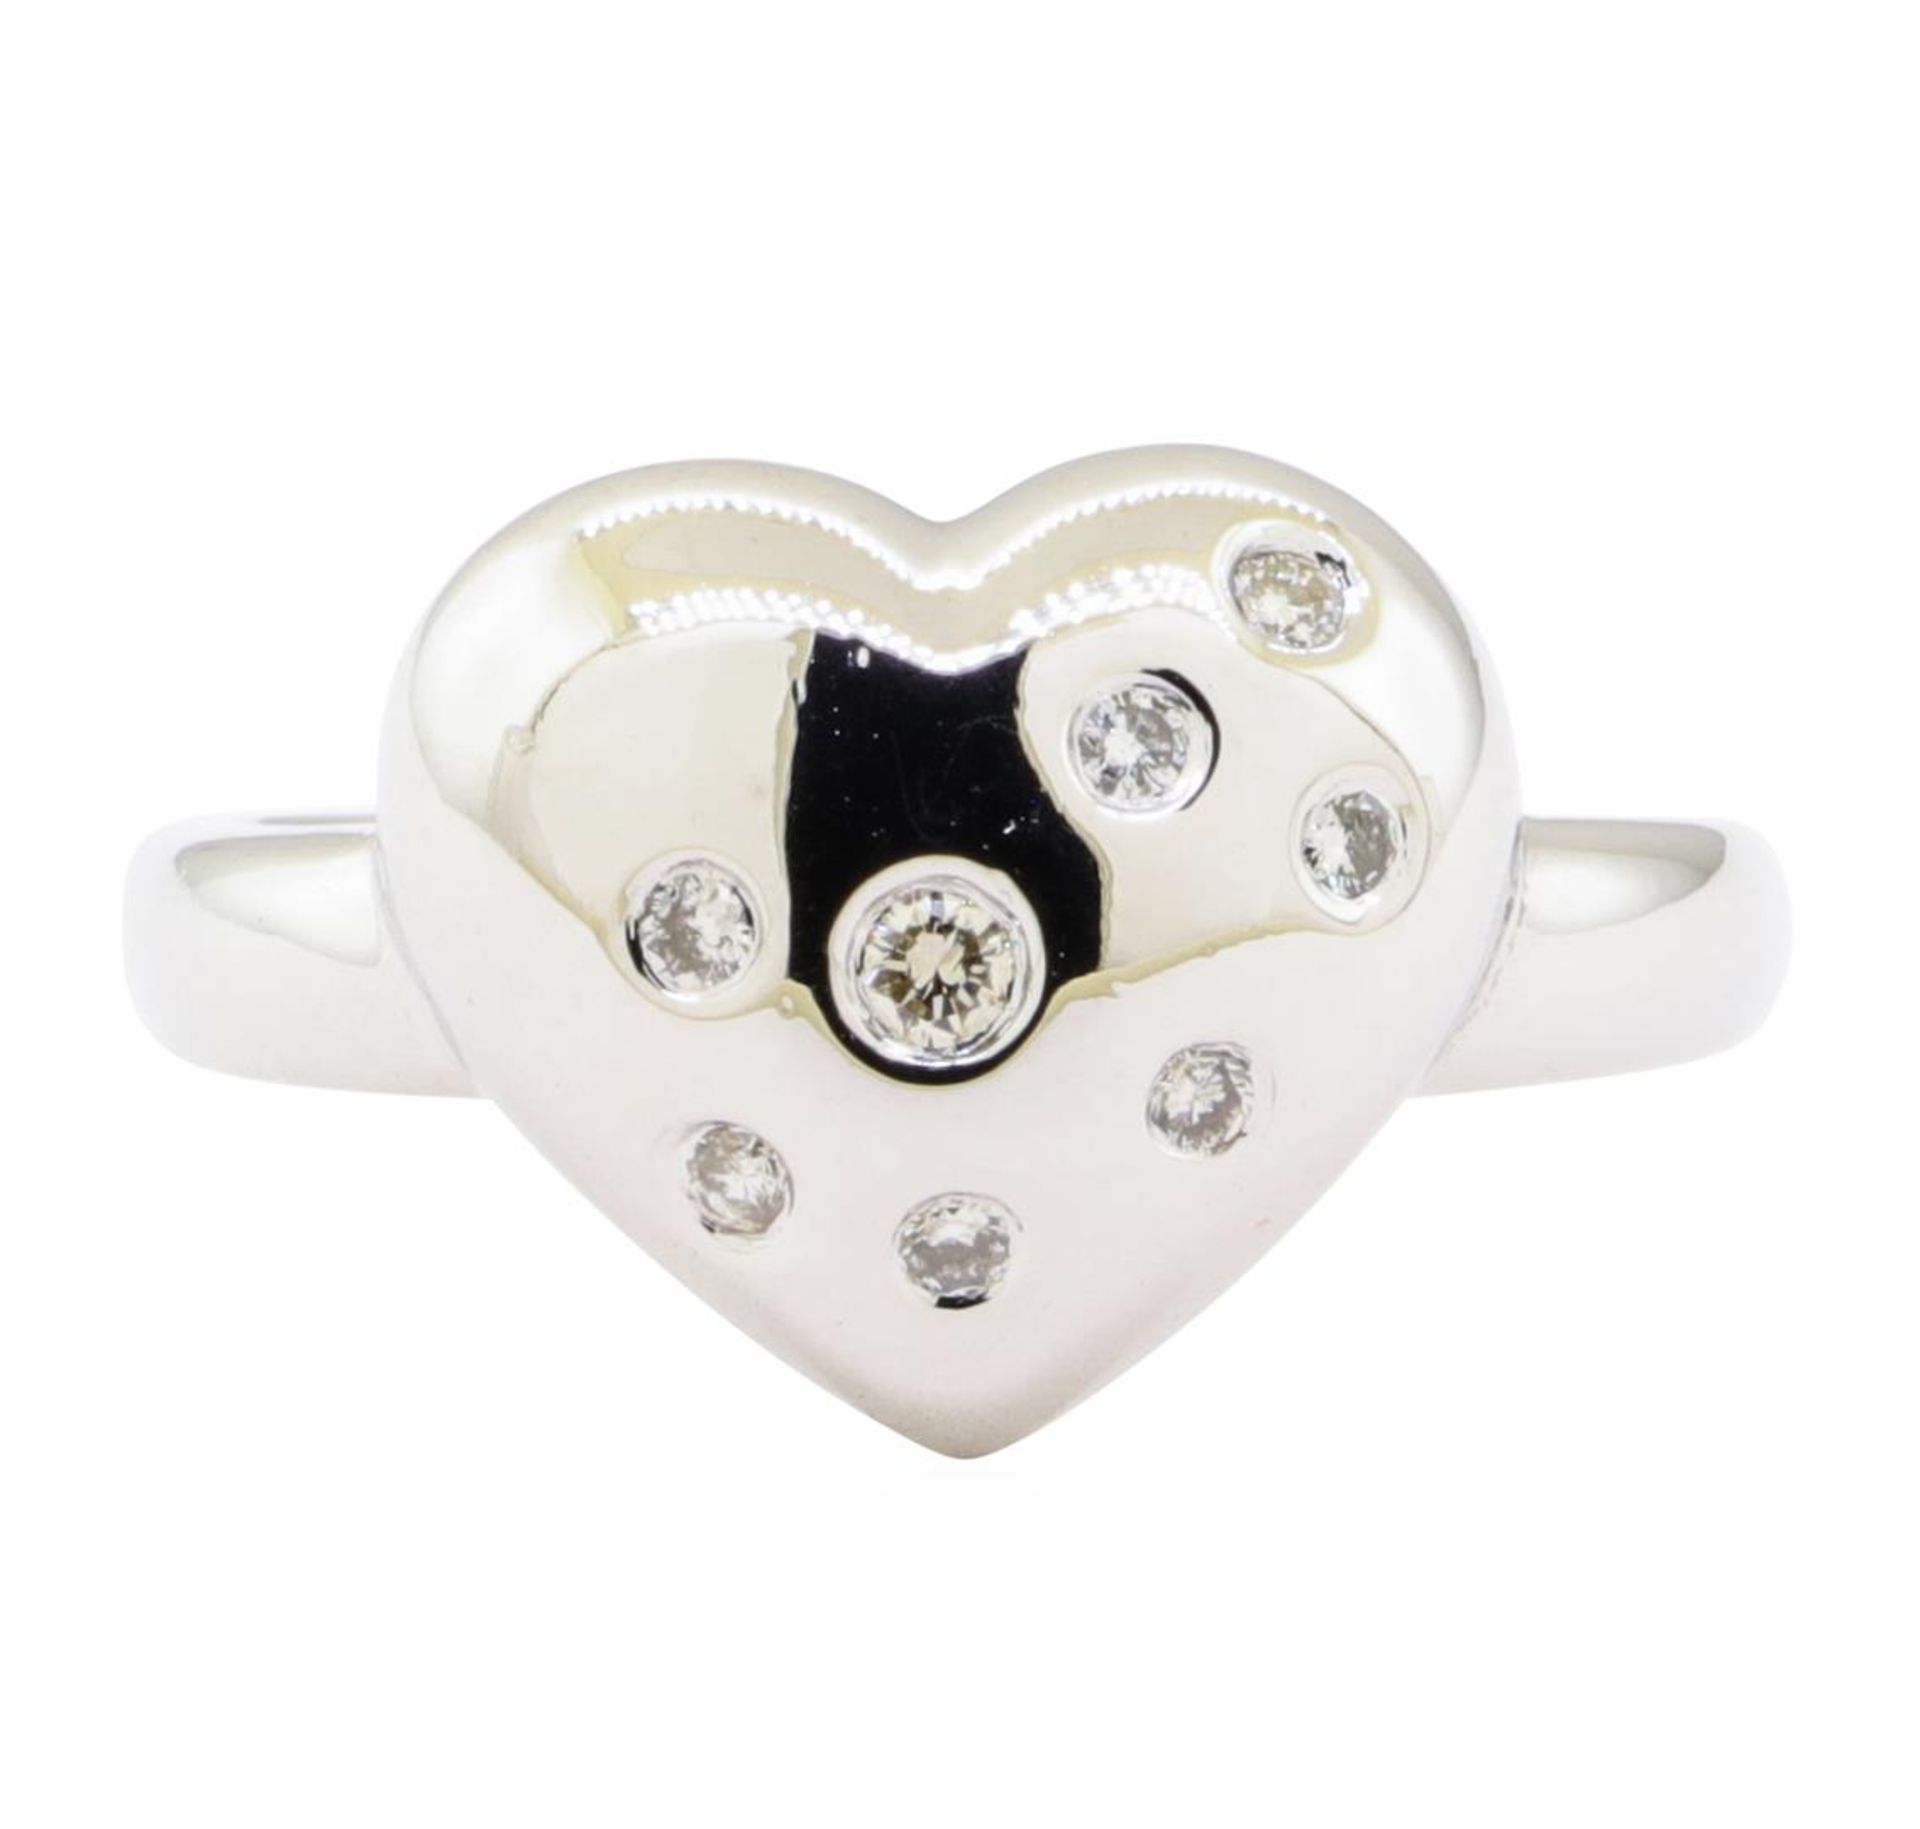 0.20 ctw Diamond Heart Shaped Ring - 14KT White Gold - Image 2 of 4